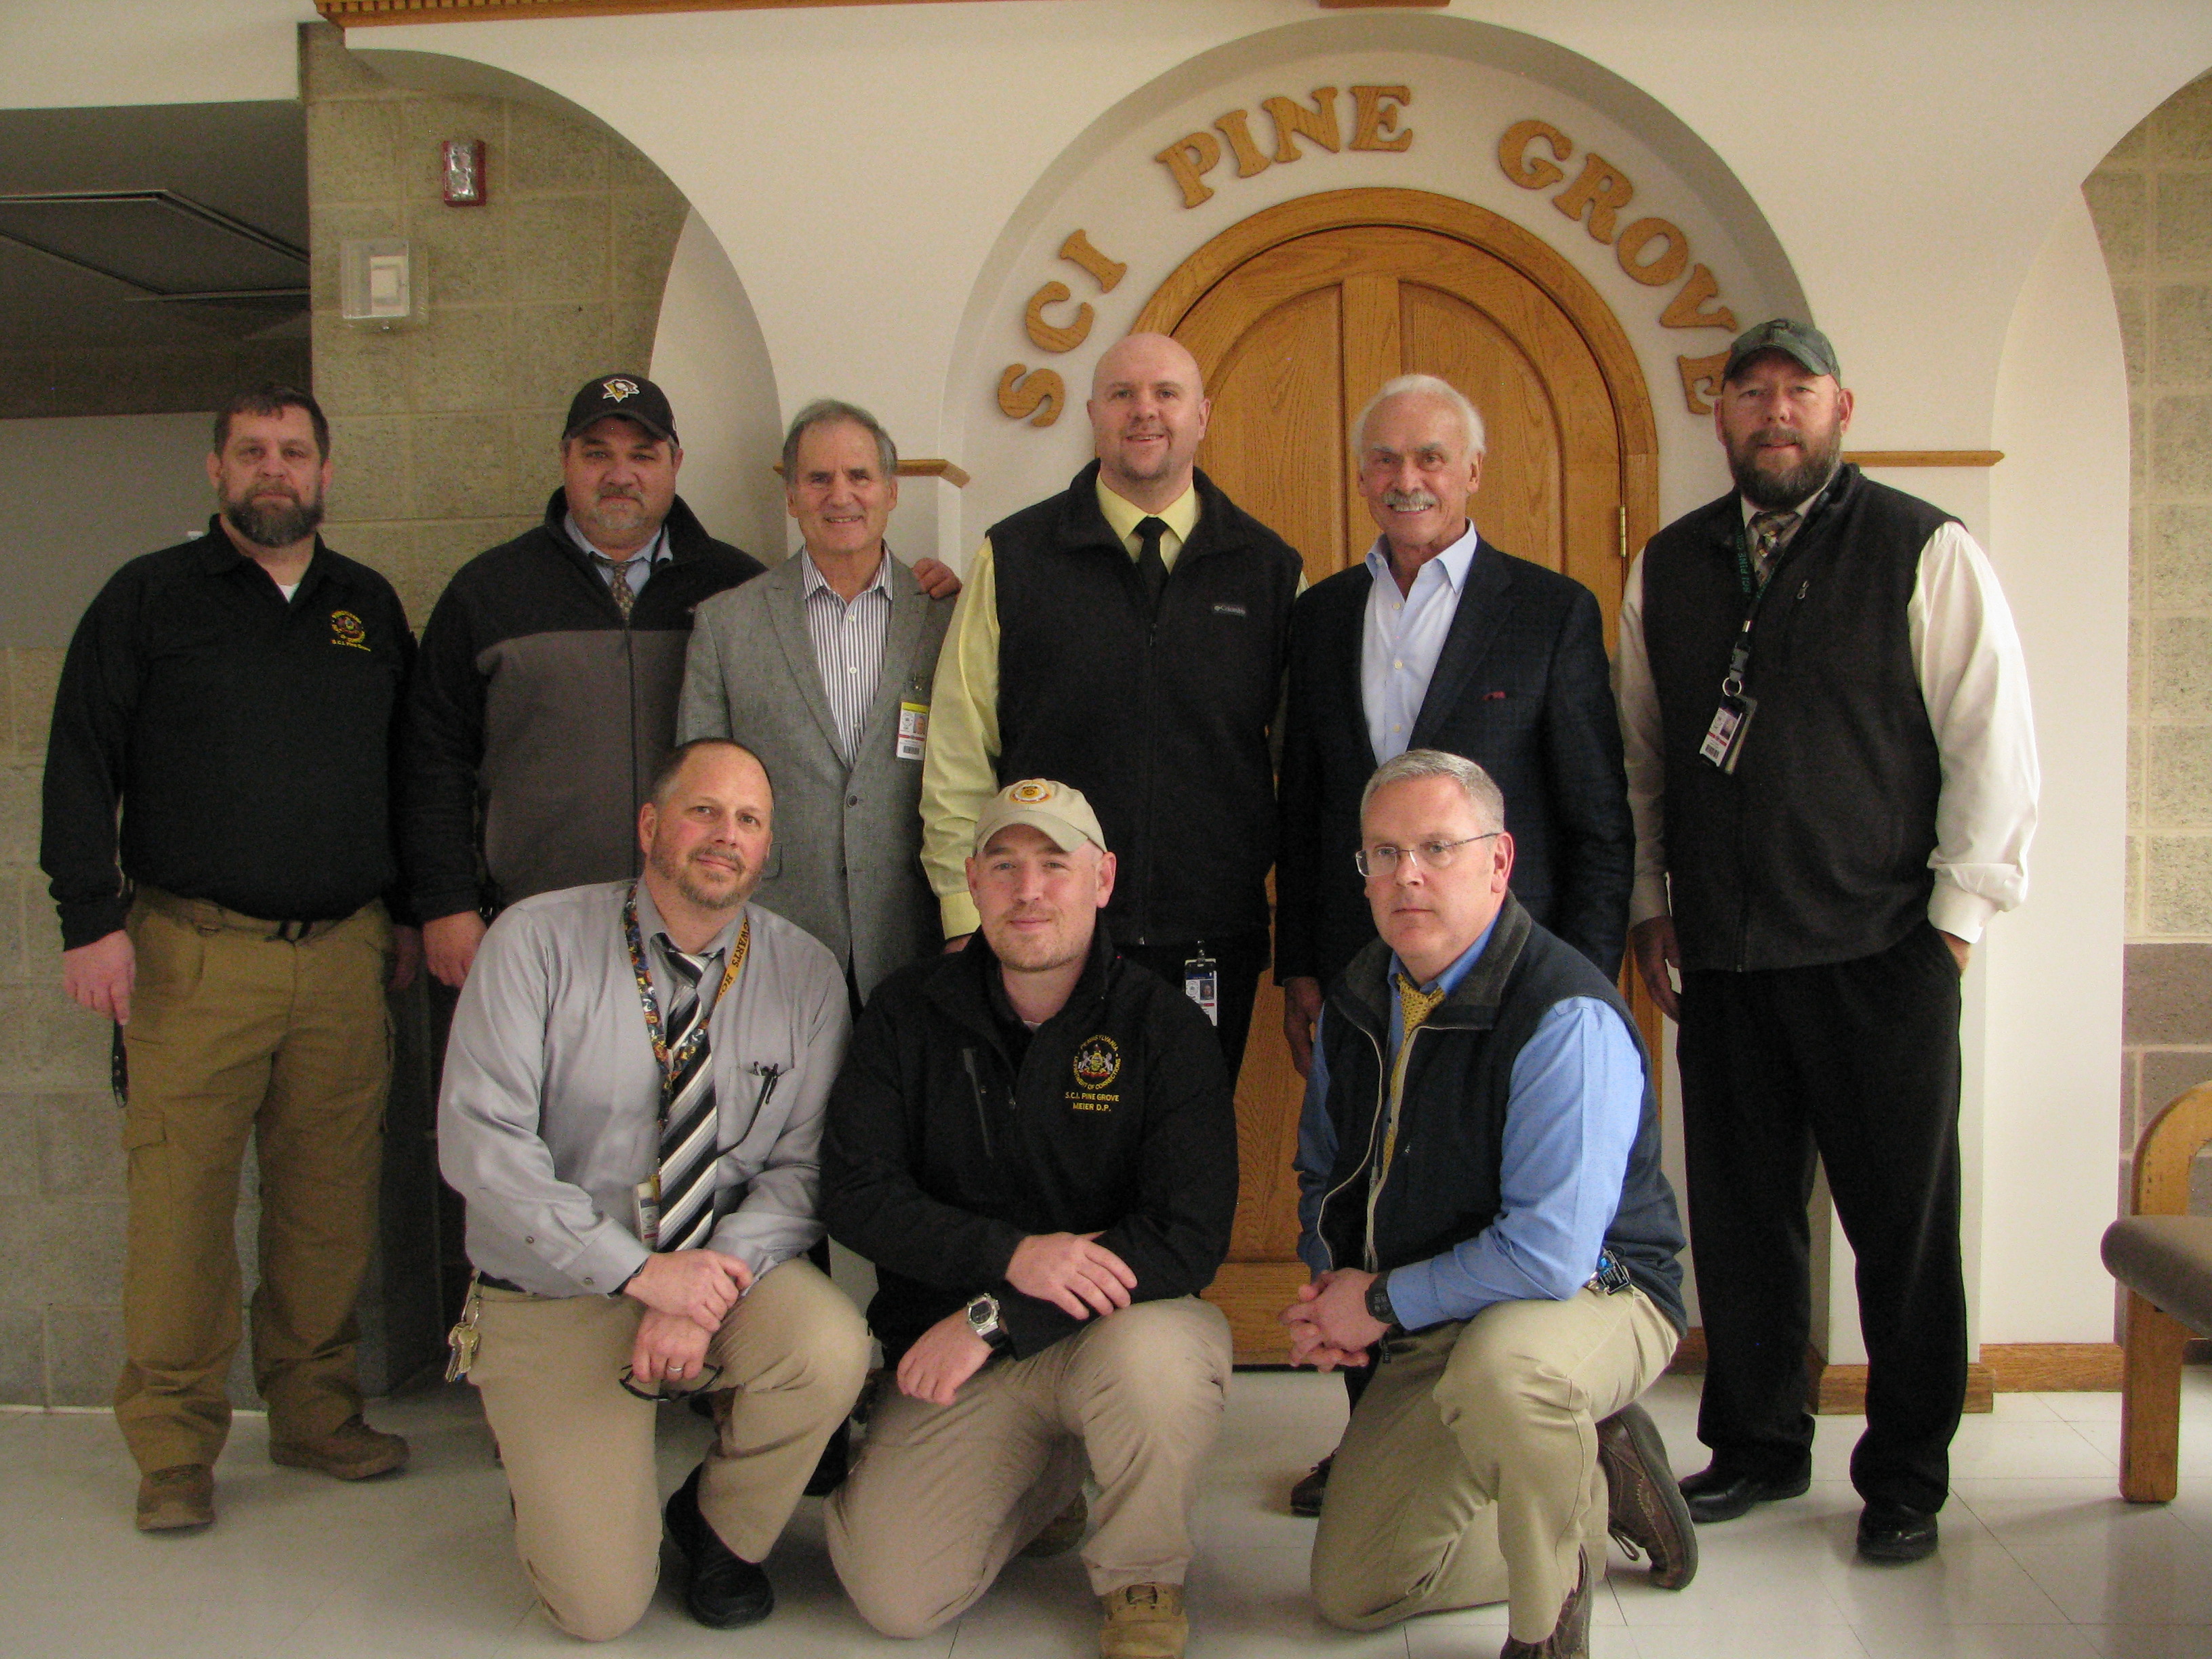 Rocky Bleier and Rocco Scalzi stand with SCI Pine Grove leadership